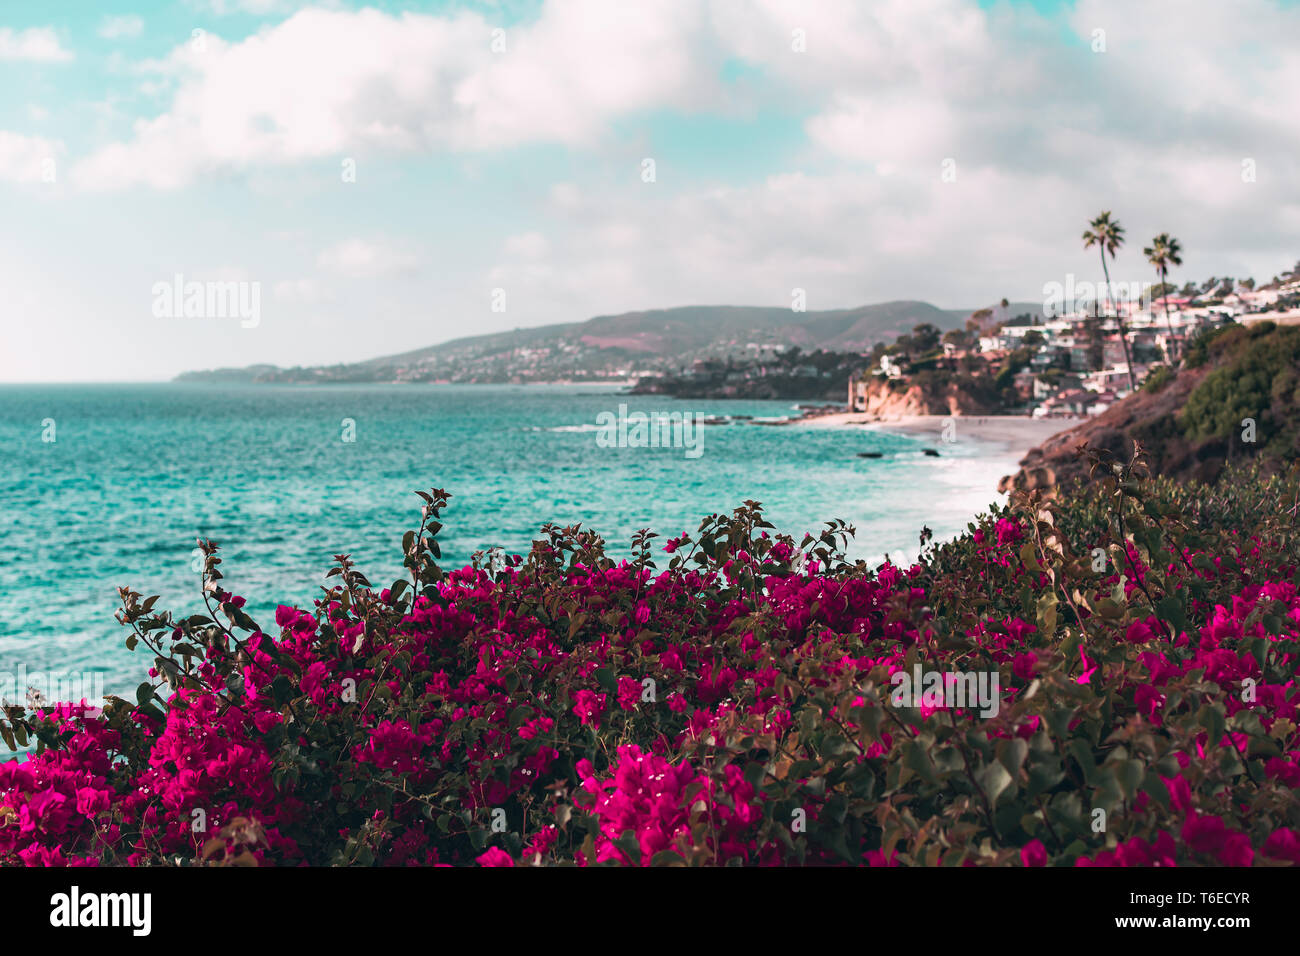 Tropical flowers along the Pacific Ocean with palm trees and the city of Laguna Beach, California, USA in the background Stock Photo